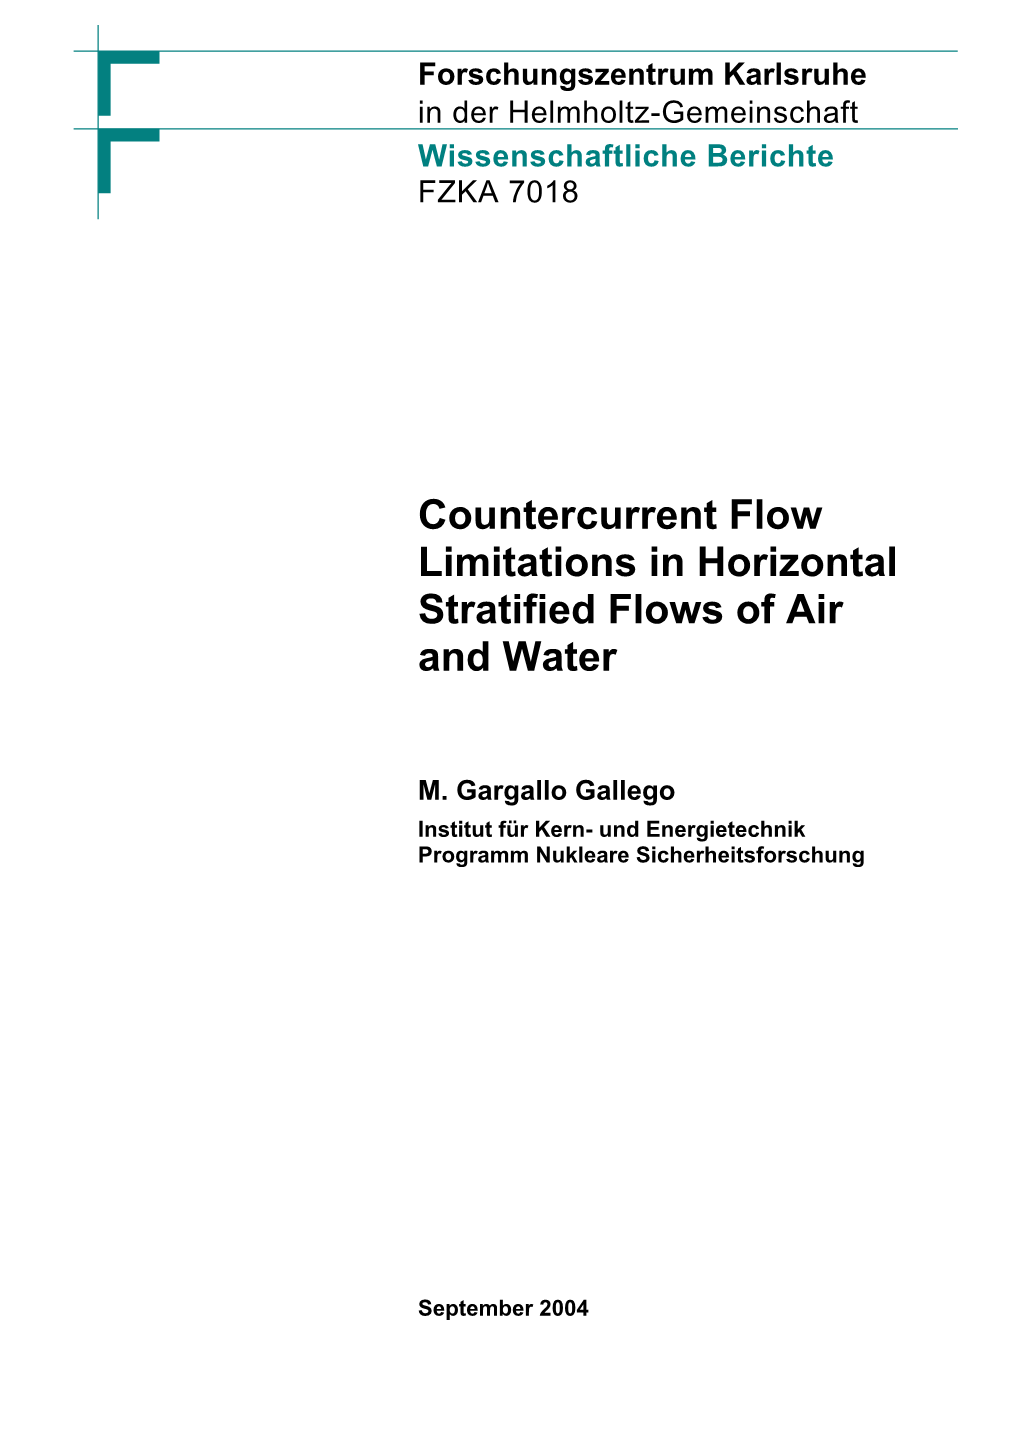 Countercurrent Flow Limitations in Horizontal Stratified Flows of Air and Water